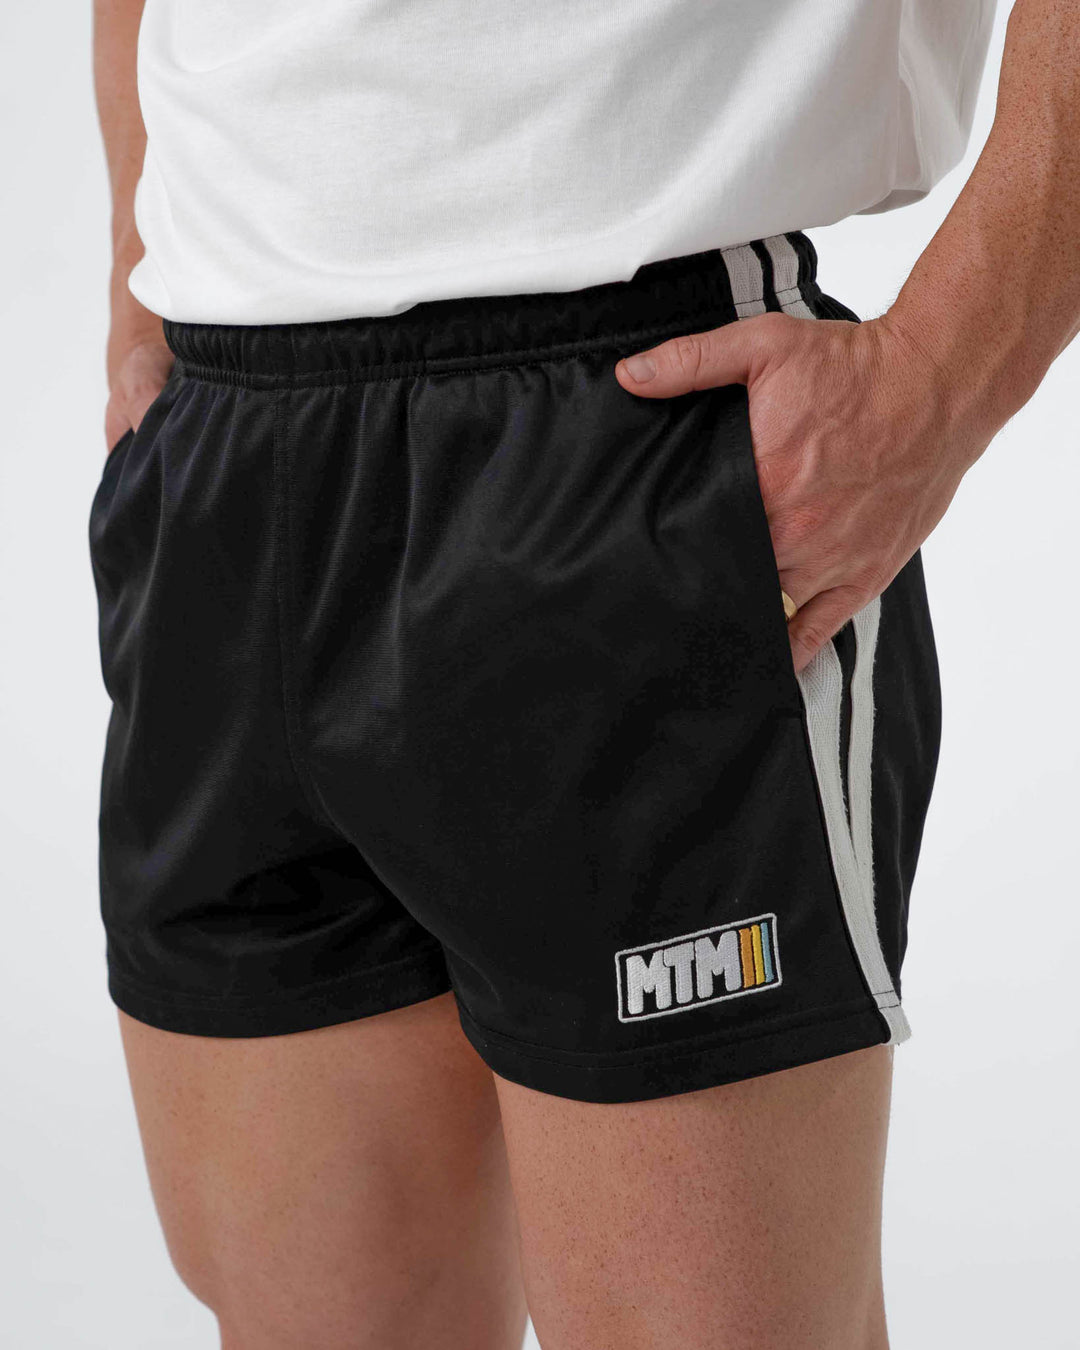 Men's Vintage 70's Gym Shorts – More Than Muscle